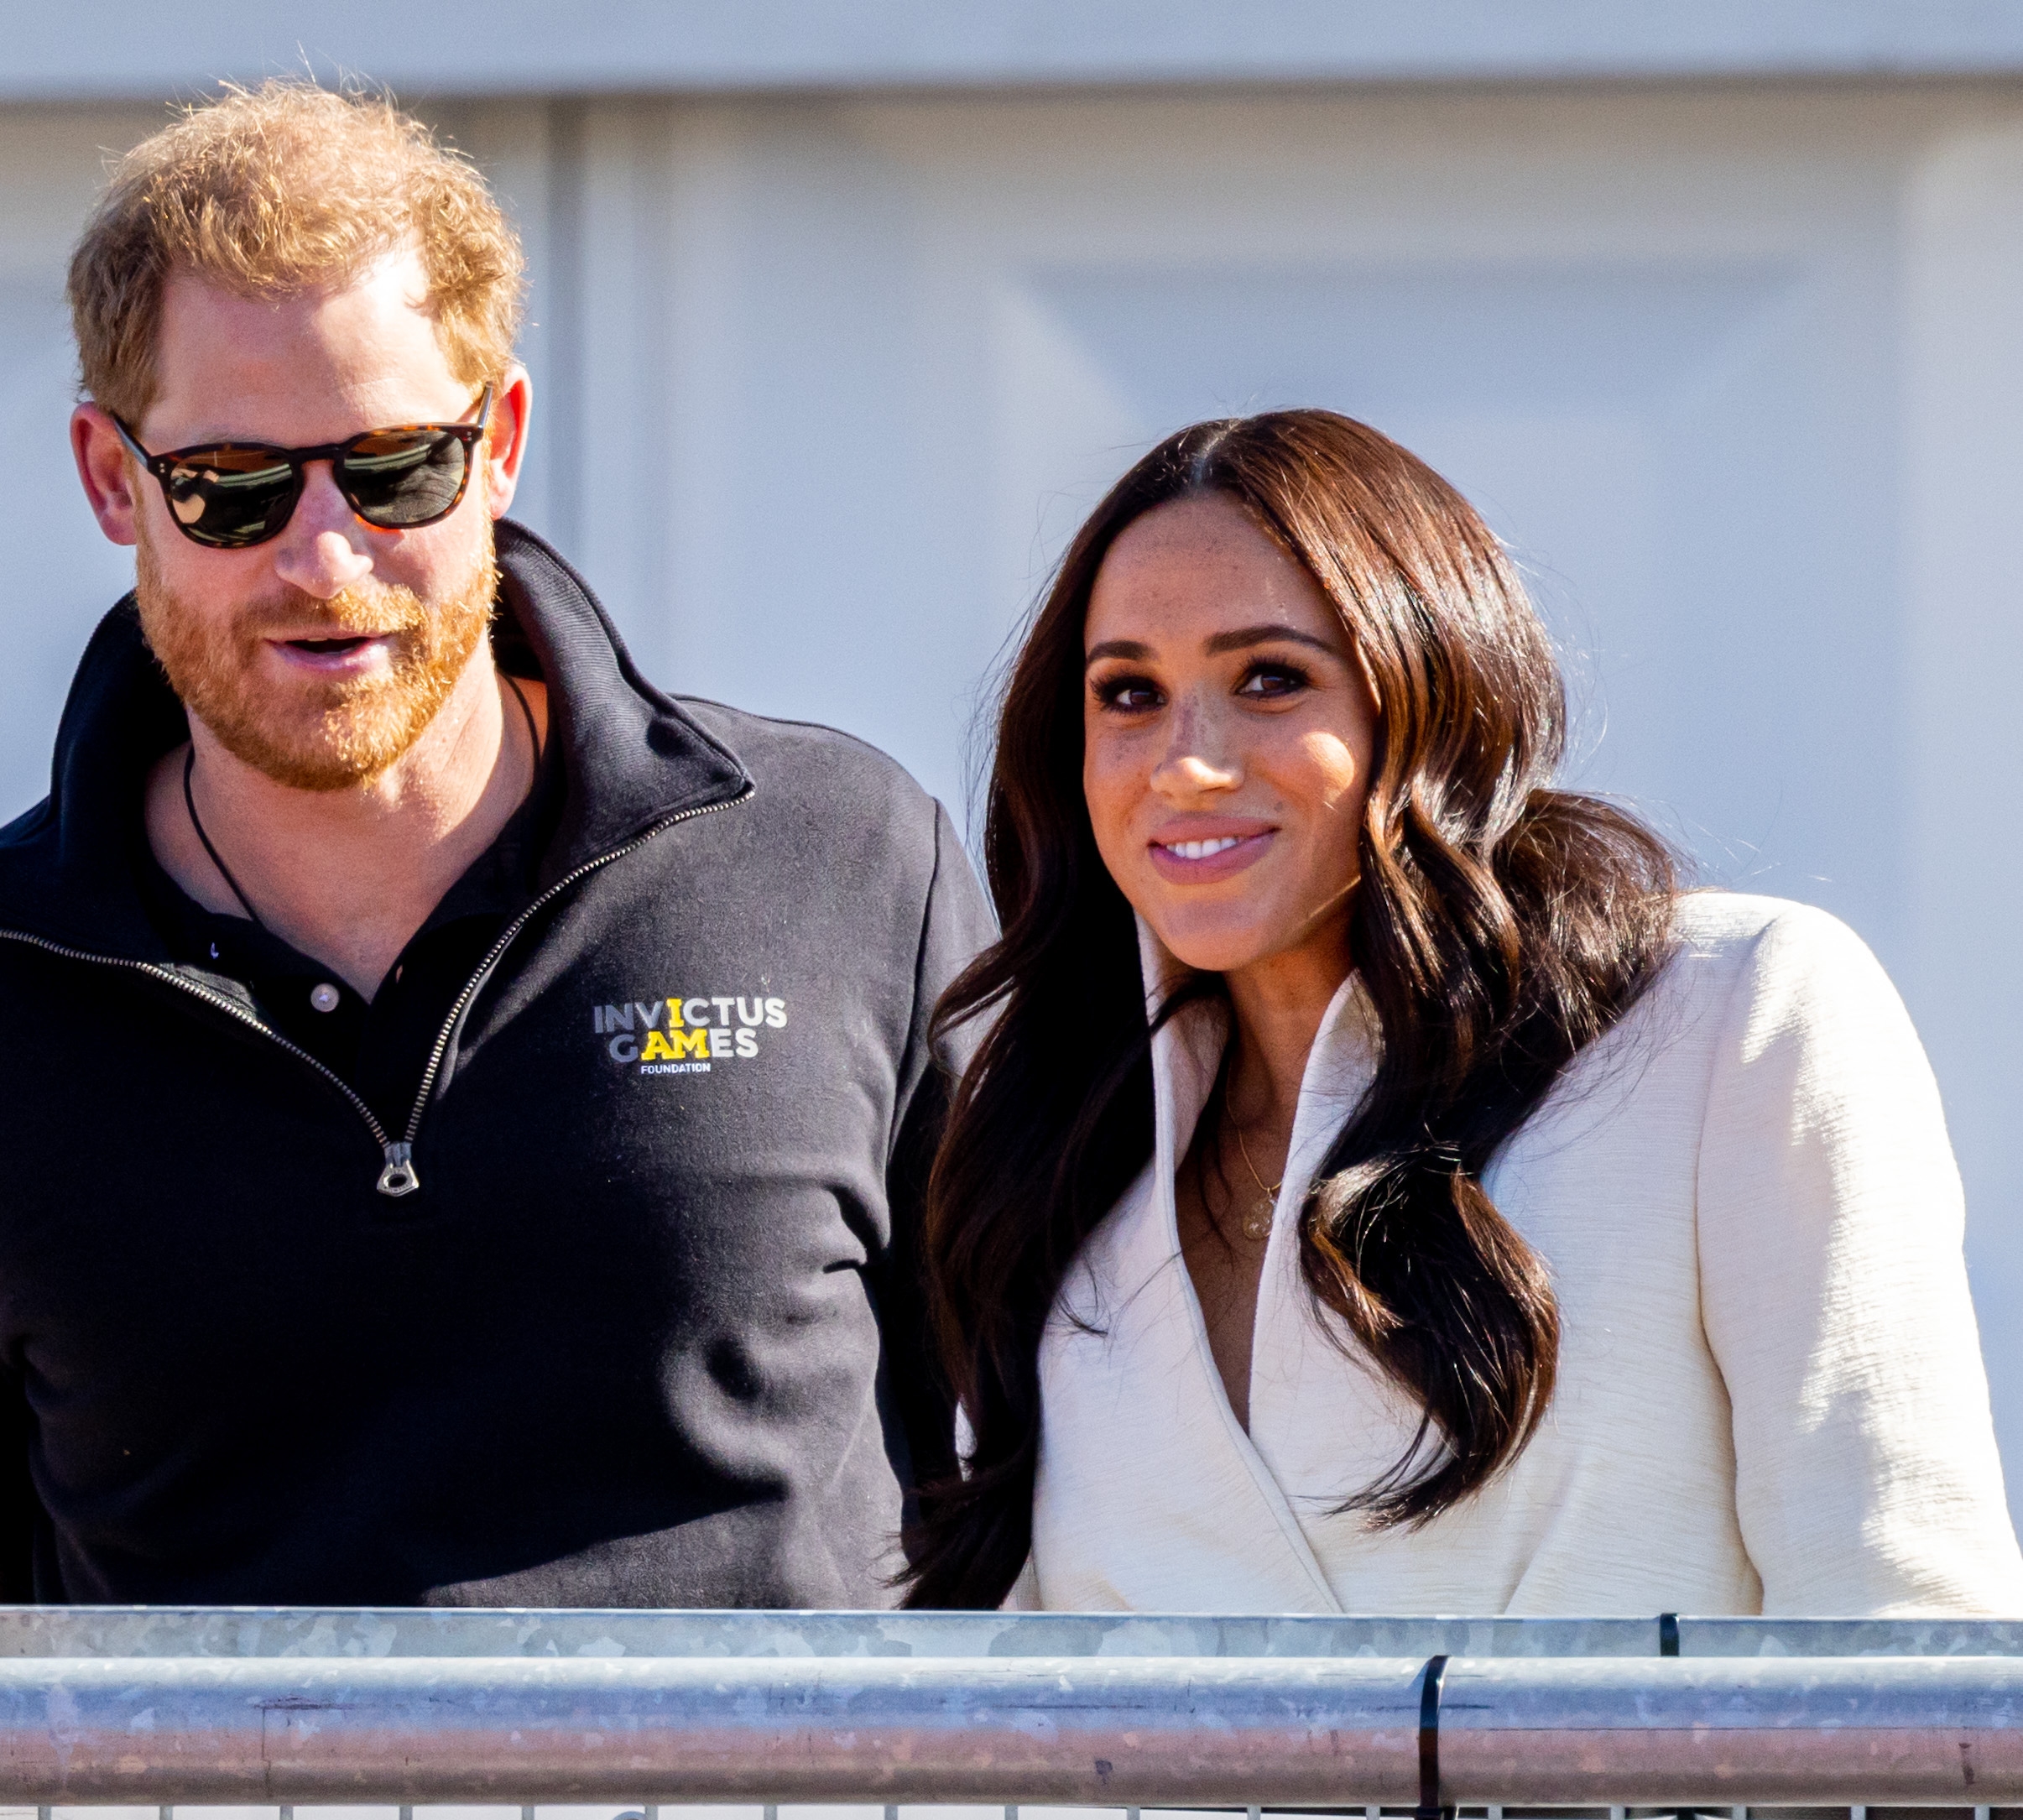 Prince Harry and Meghan Markle smiling during the Invictus Games at Zuiderpark